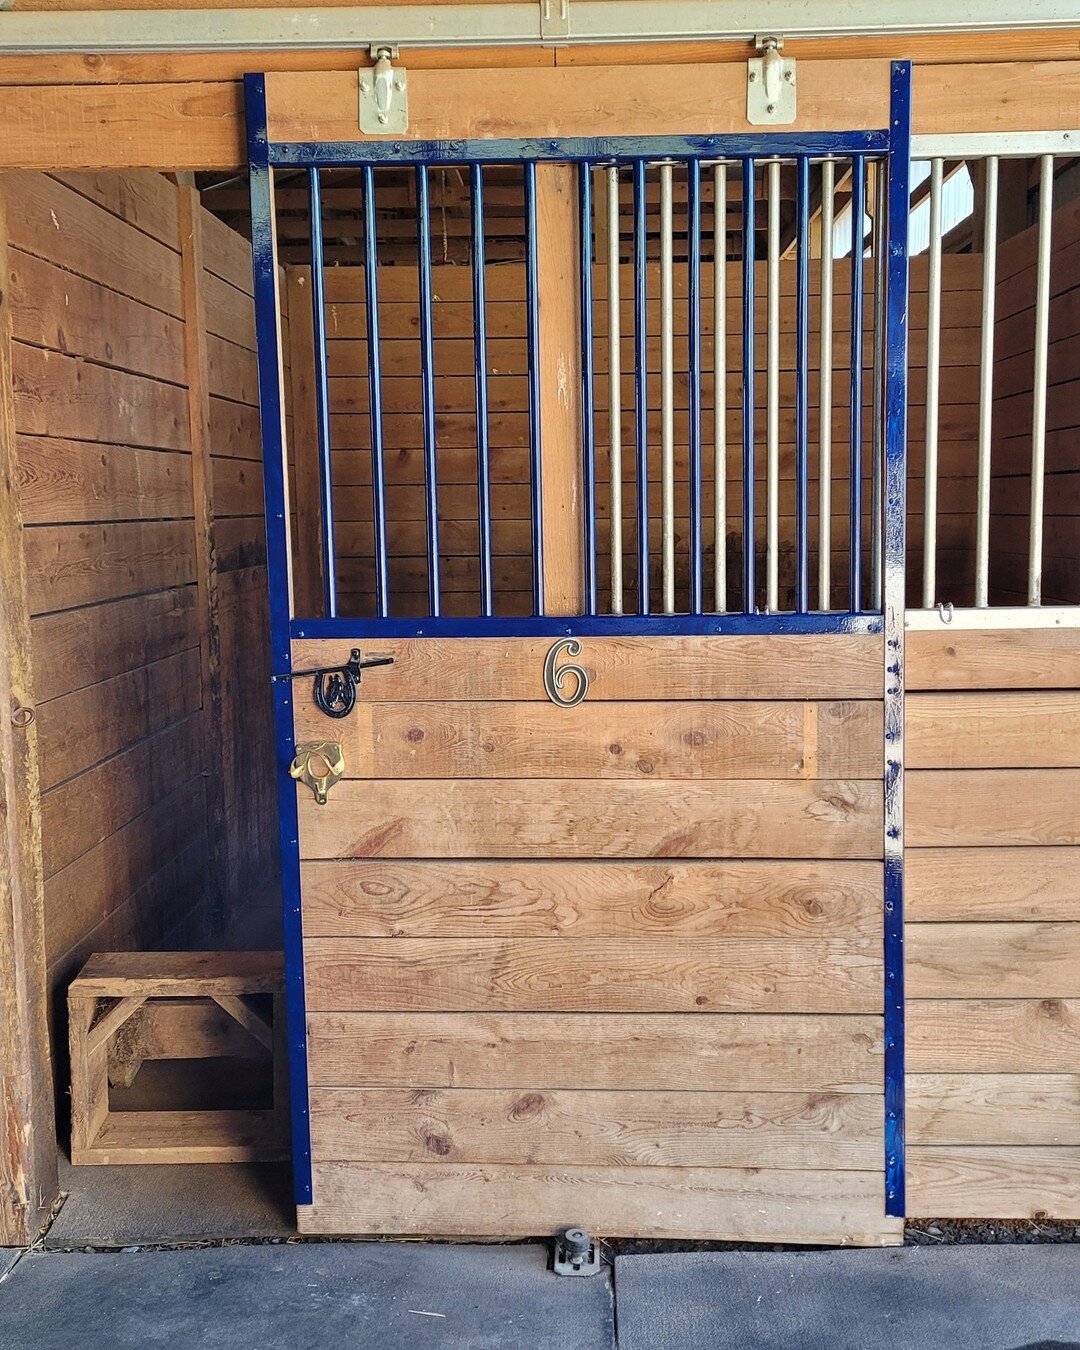 We love the look of our newly painted stall bars! Do you? Many more changes to come within the year. 🦄 Follow us for updates as we transform our farm into a fairy tale stables! 
.
.
.
.
.
.
#horsestall #horsestalls #horsefarm #horsebarn #barn #stabl